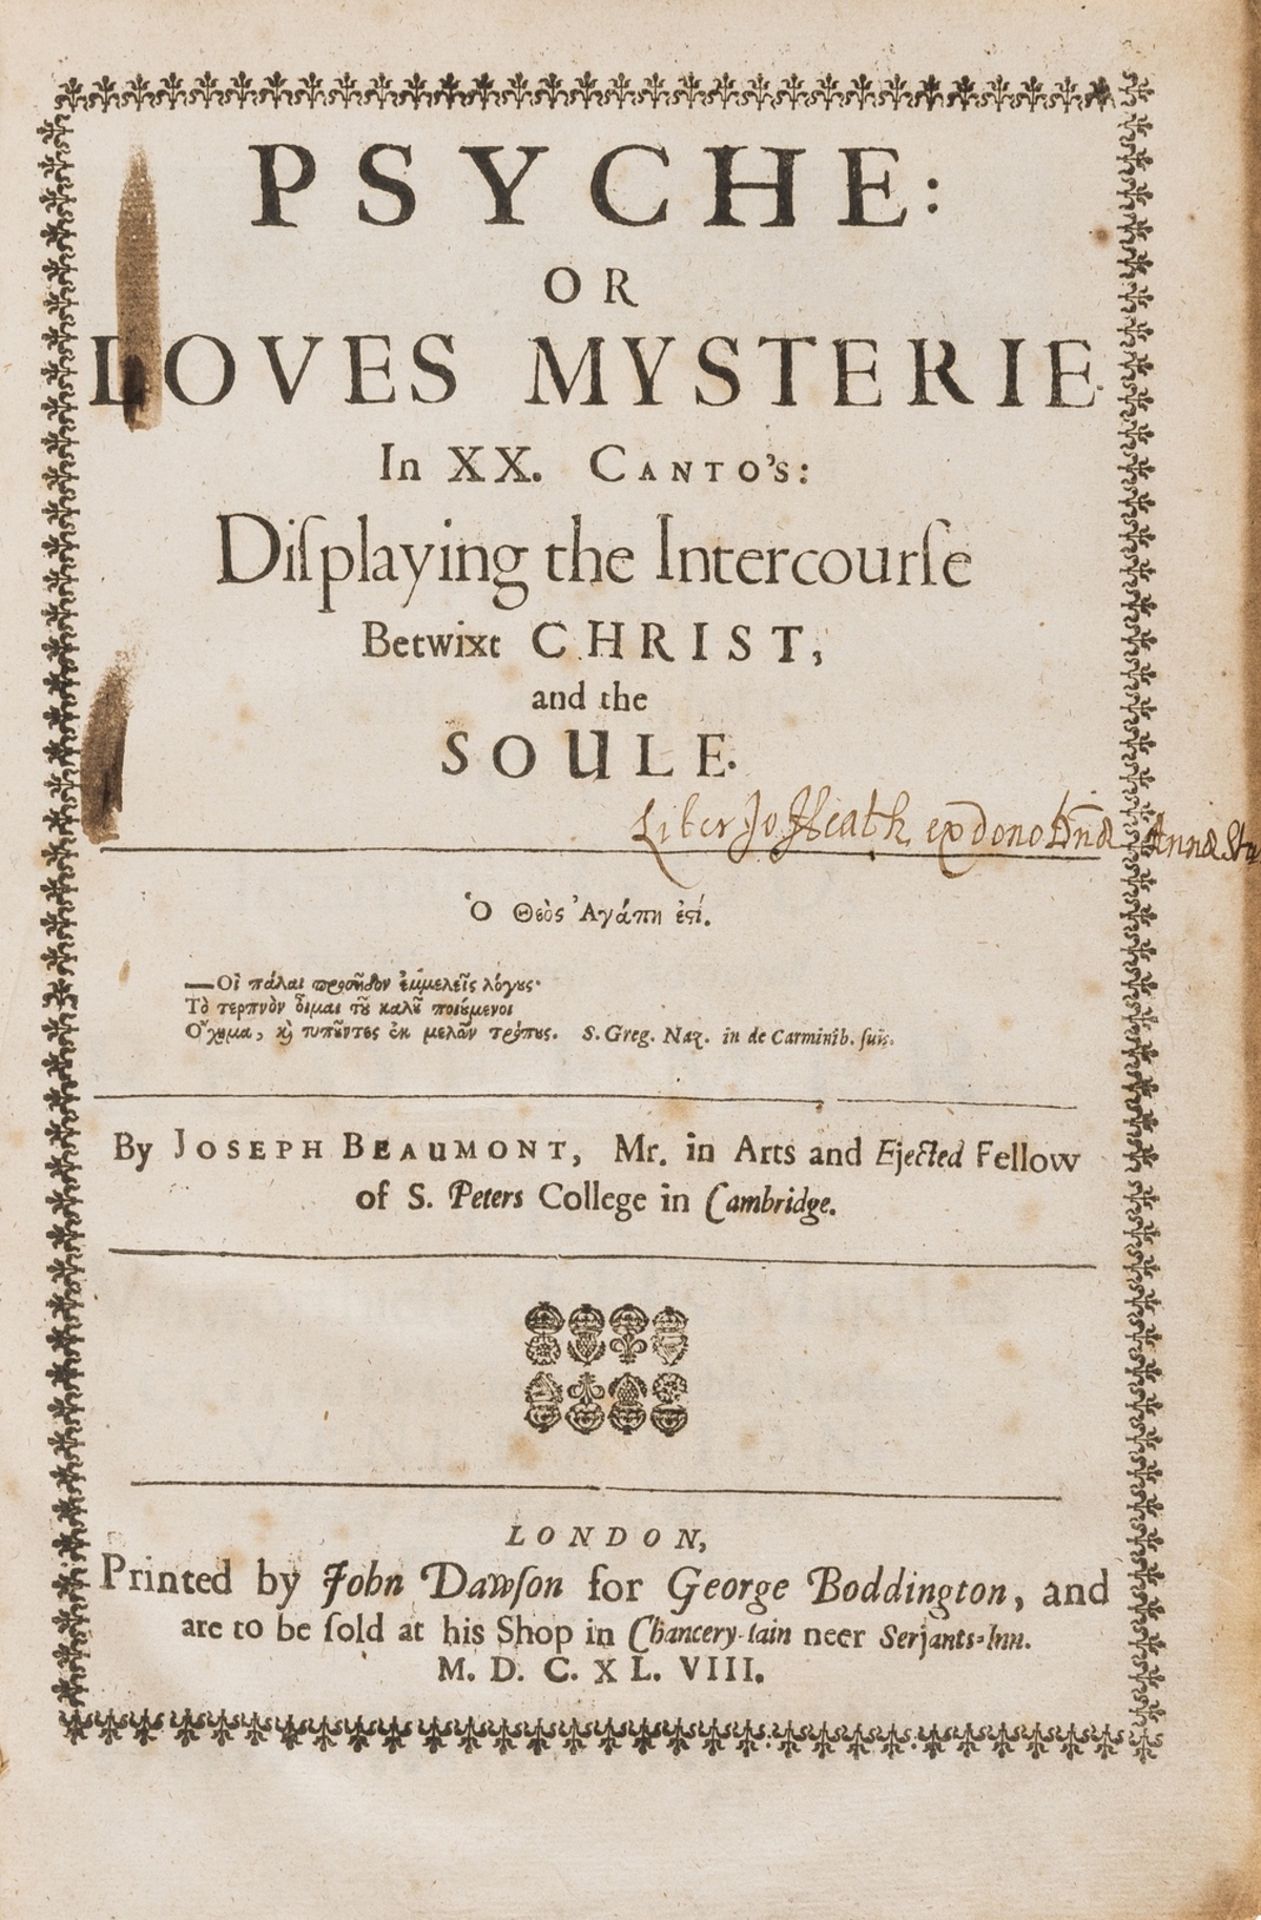 Beaumont (Joseph) Psyche: or Loves Mysterie in XX. Canto's: Displaying the Intercourse betwixt …